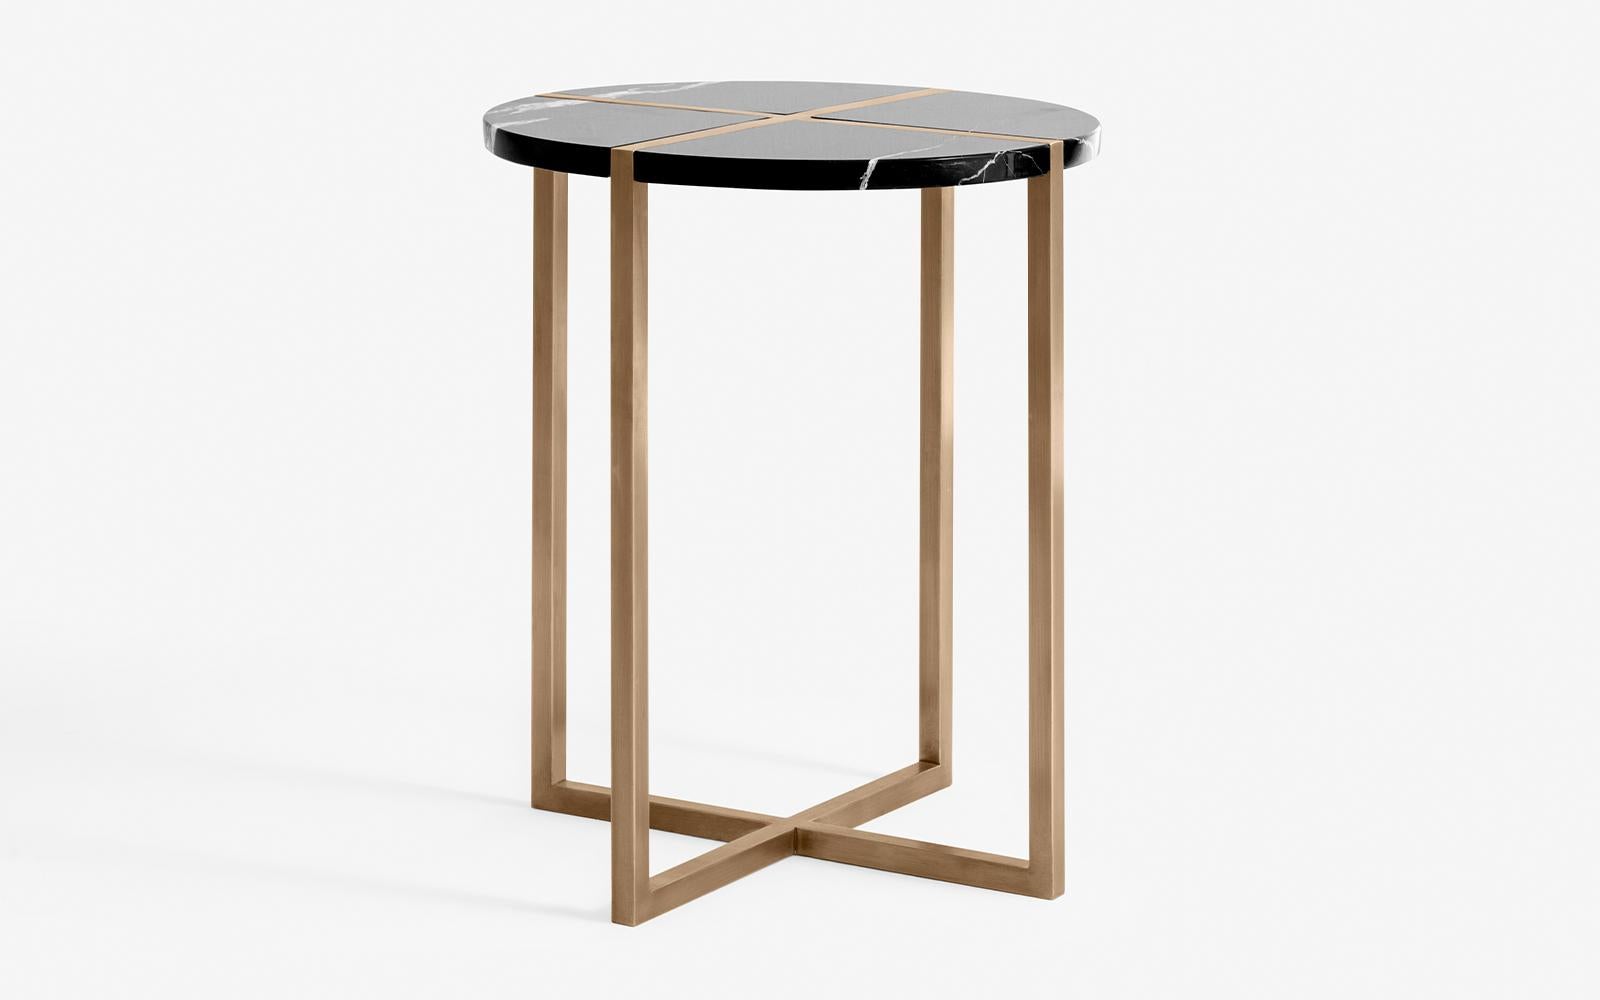 **LEAD TIME 2 WEEKS**

The Famed side table designed as a flawless intersection of marble and brass...

Measures: diameter: 17.7'' / height: 21.3''
Weight: 11.8 kg

-Alexander black marble
-Brass plated metal
-Registered design